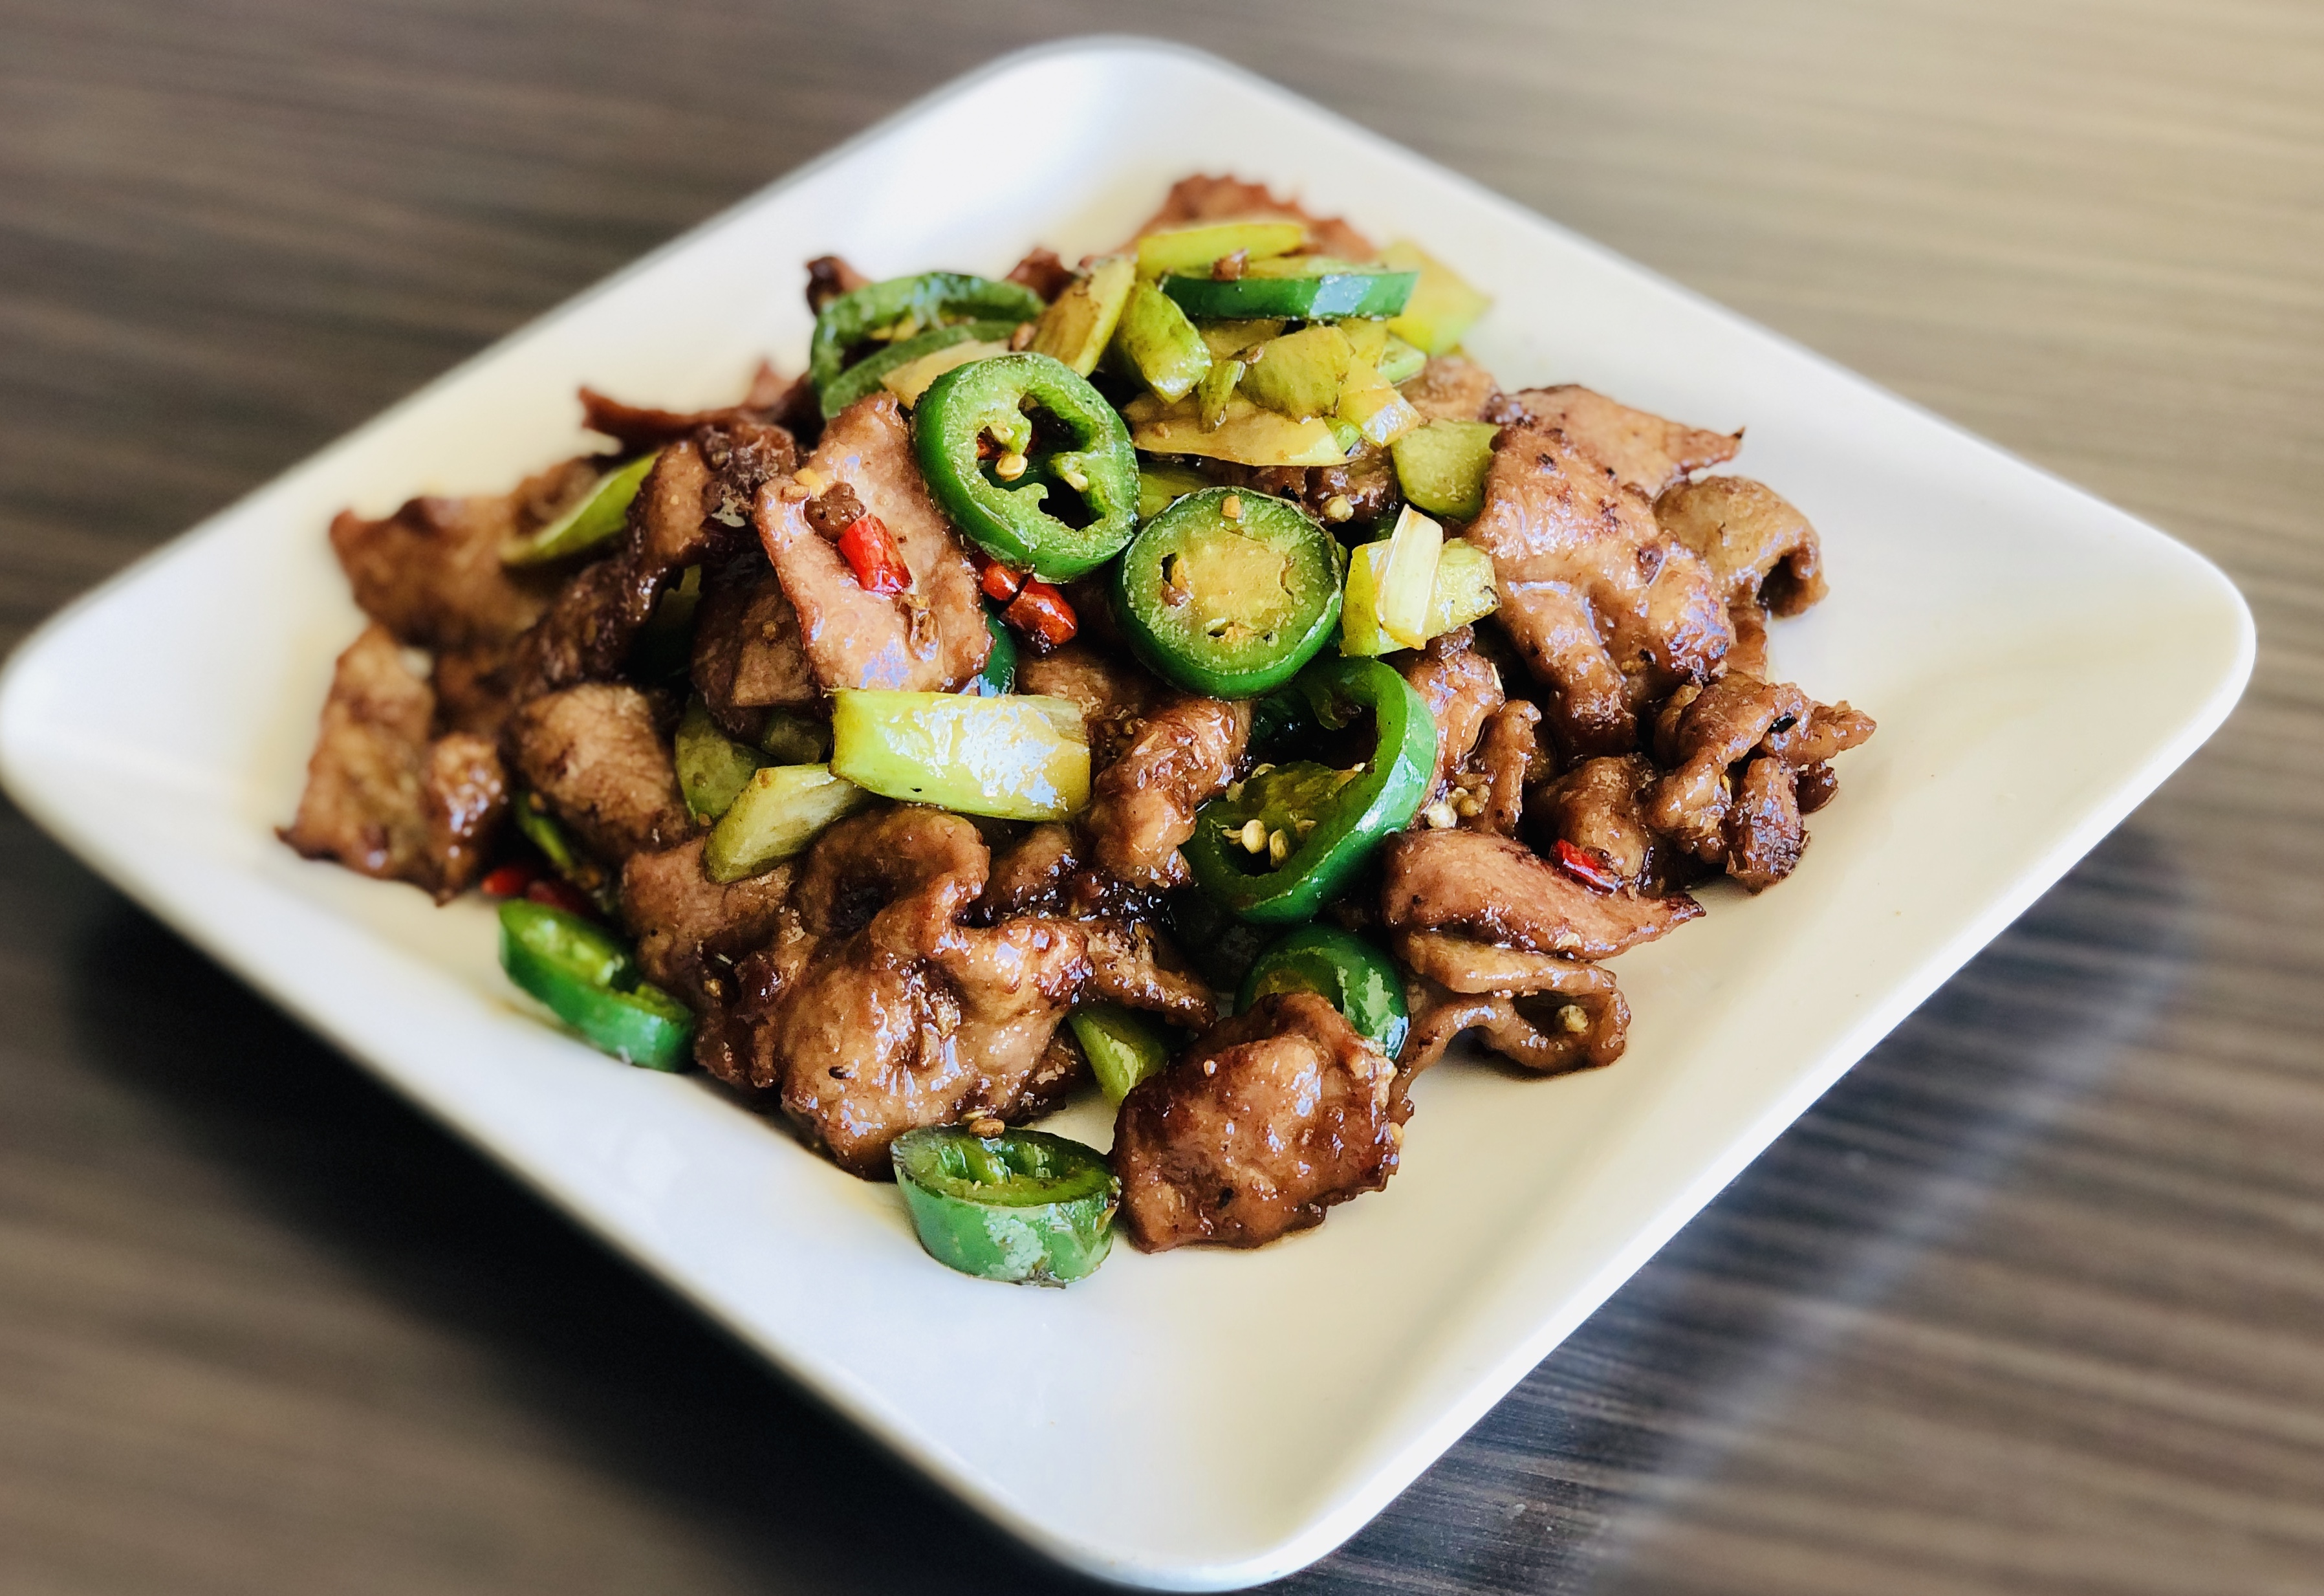 Stir Fried Beef with Pickled Chili 泡椒牛--Extra Spicy